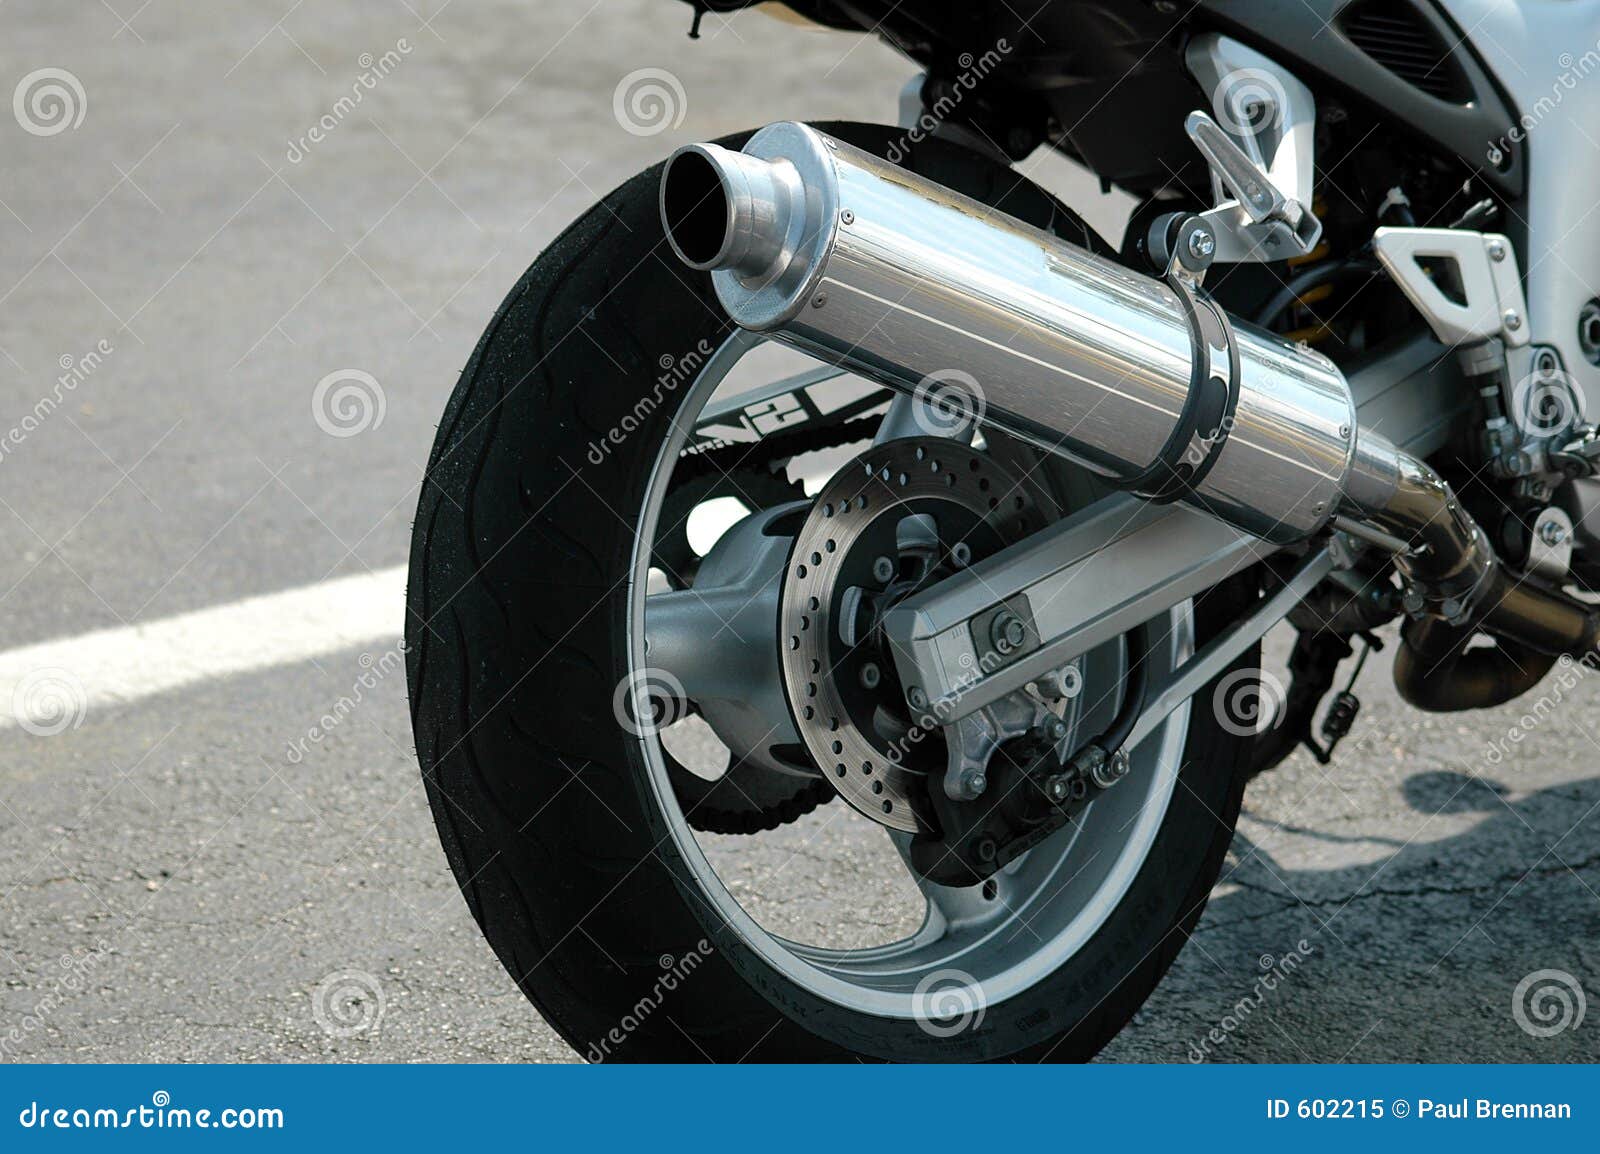 Motorcycle stock image. Image of speed, engine, tires, travel - 602215